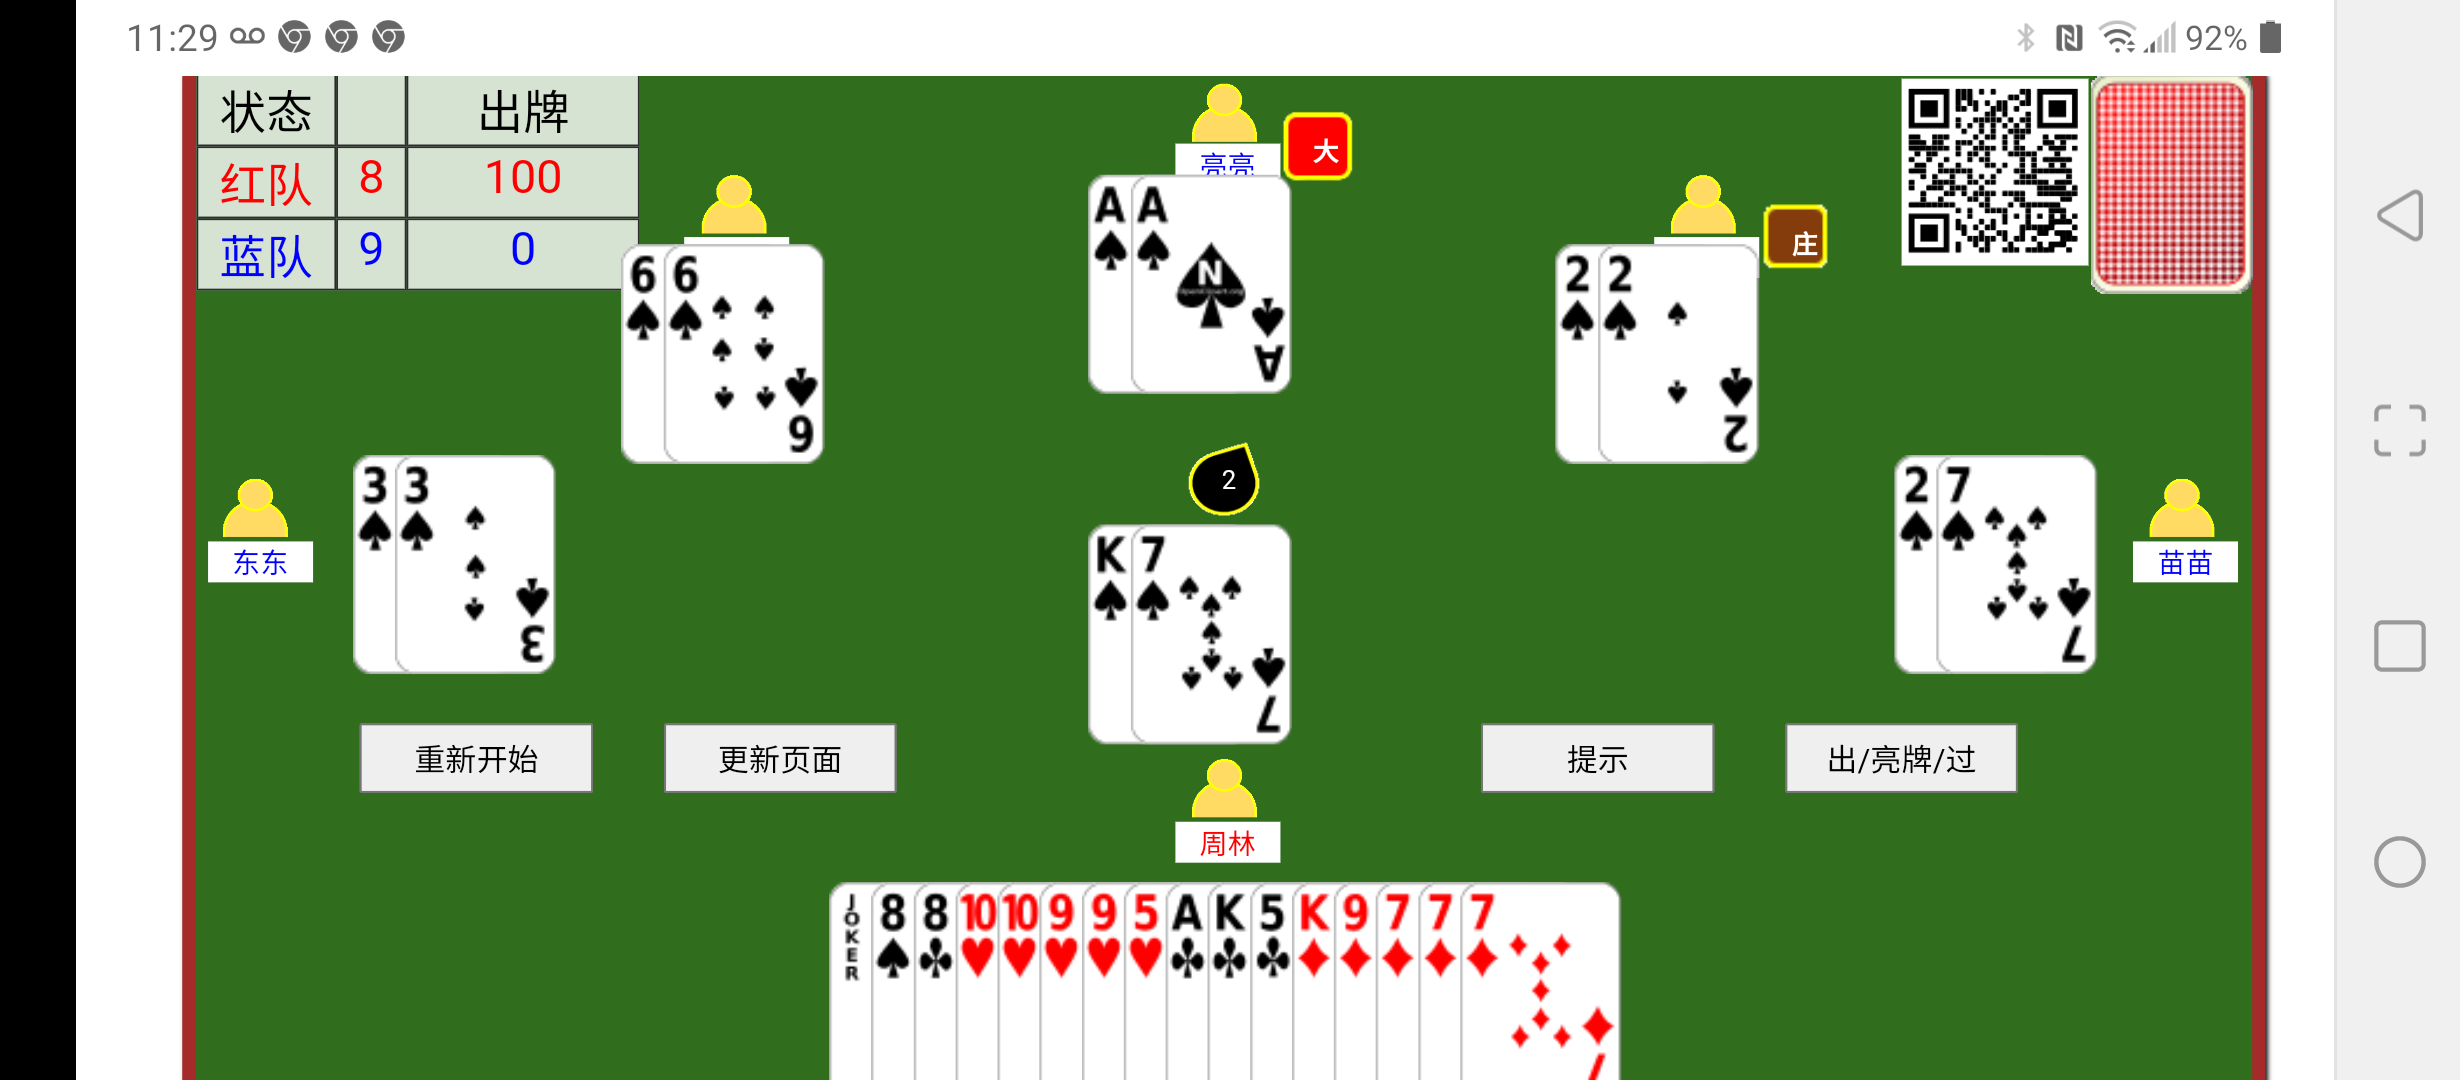 html5 tractor card game Screenshot_20220122-112956.png